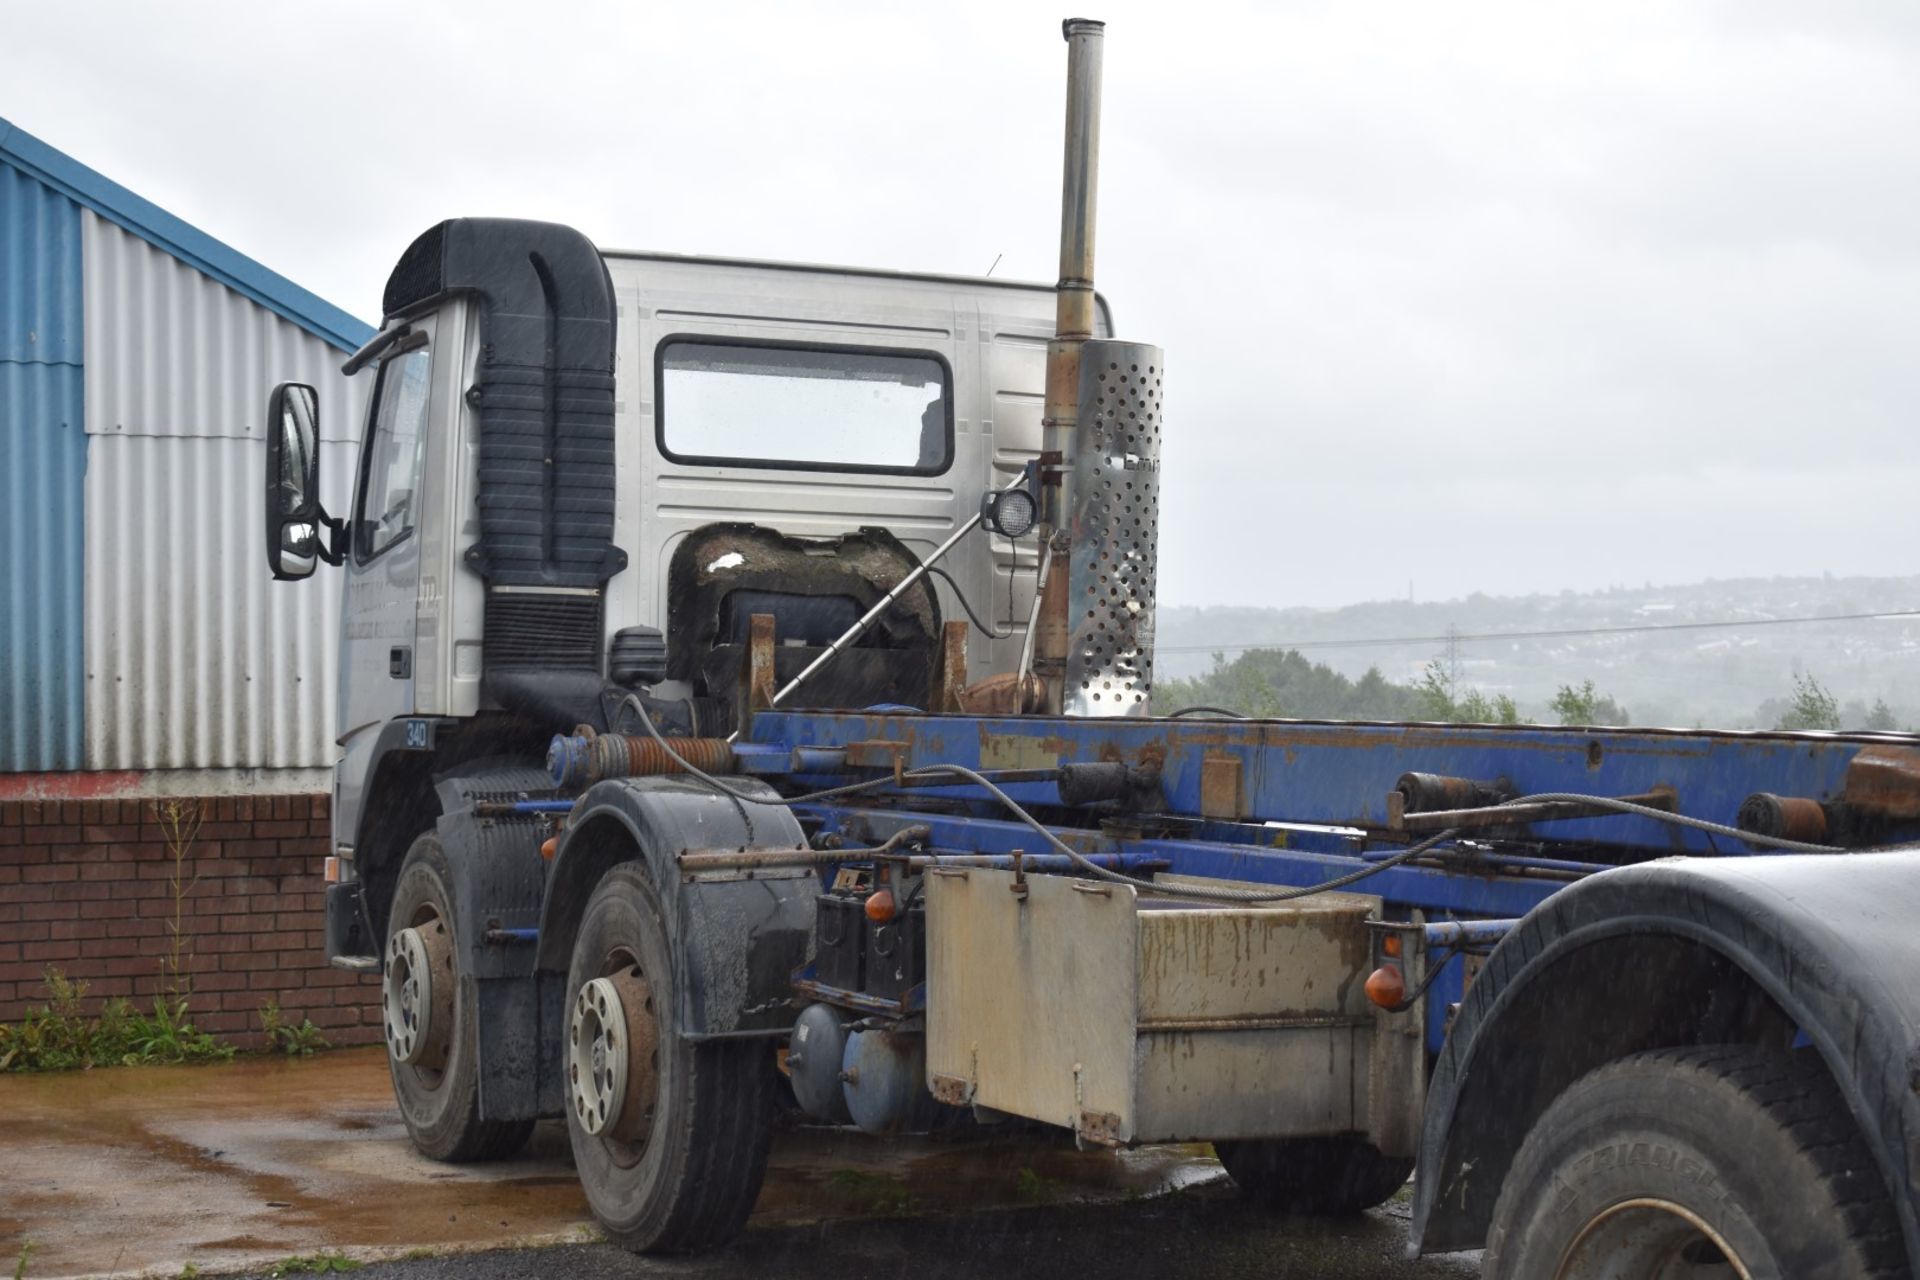 1 x Volvo 340 Plant Lorry With Tipper Chasis and Fitted Winch - CL547 - Location: South Yorkshire. - Image 9 of 25